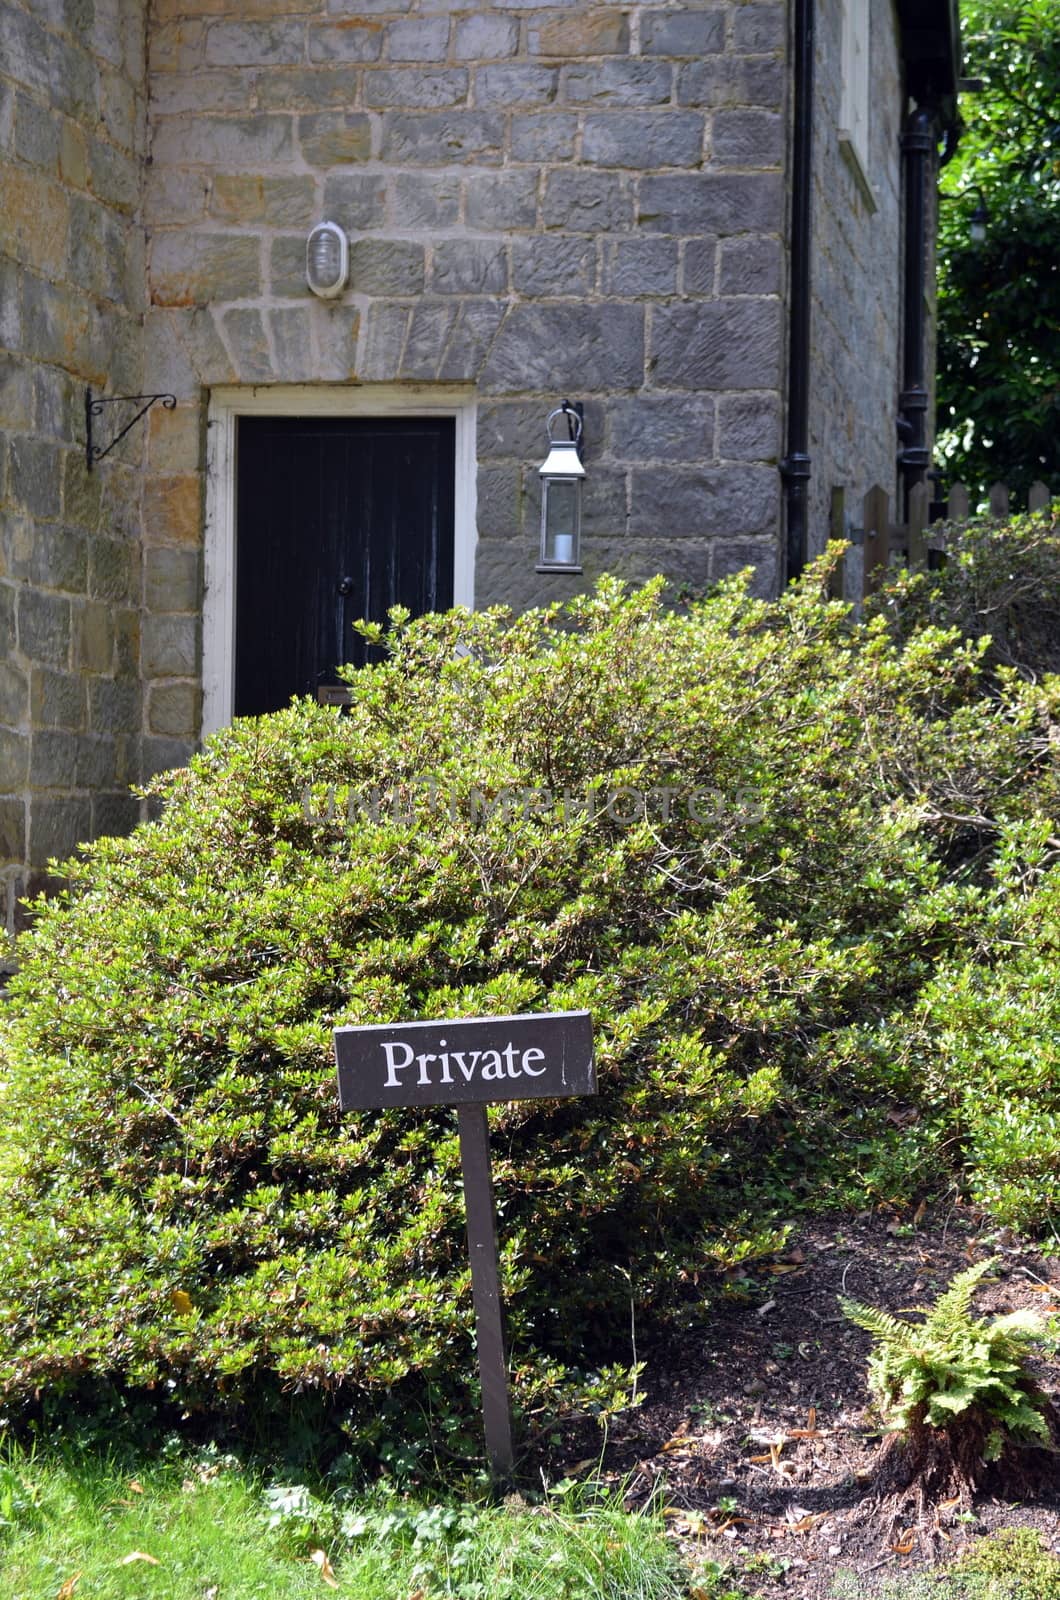 Private sign outside a cottage in England.